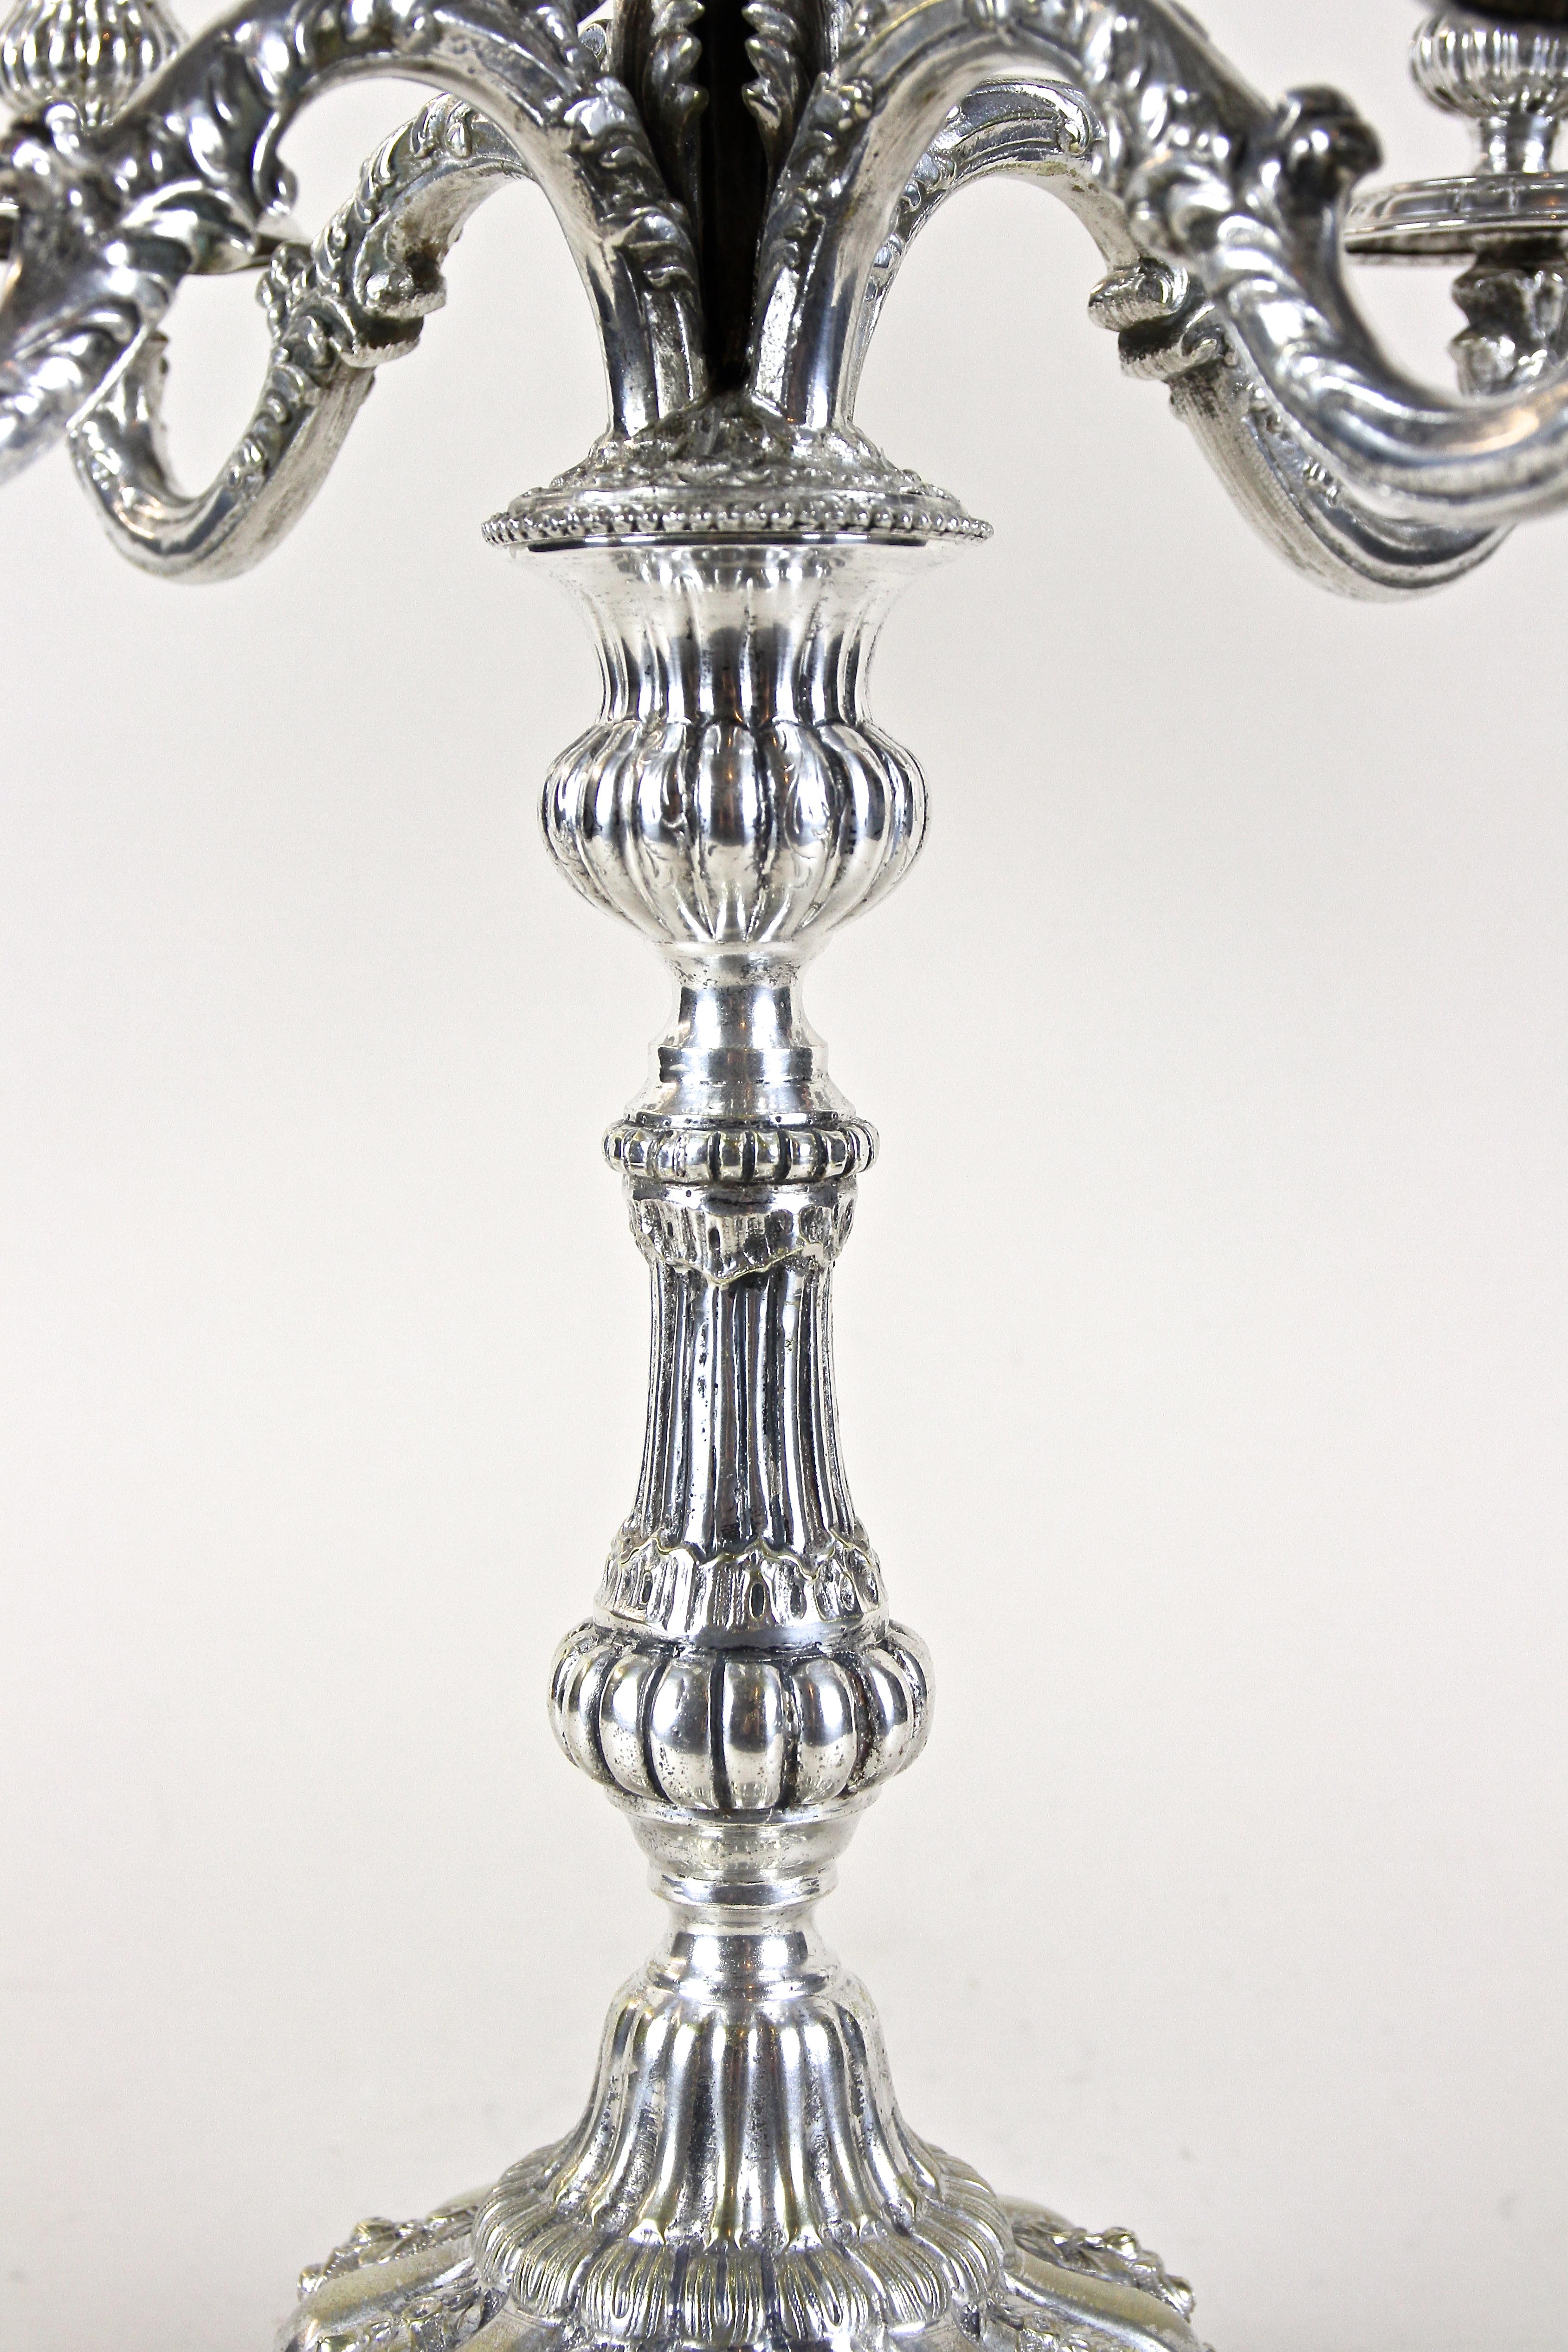 Pair of 19th Century Silvered Candelabras 5-Armed, Austria, circa 1860 For Sale 5